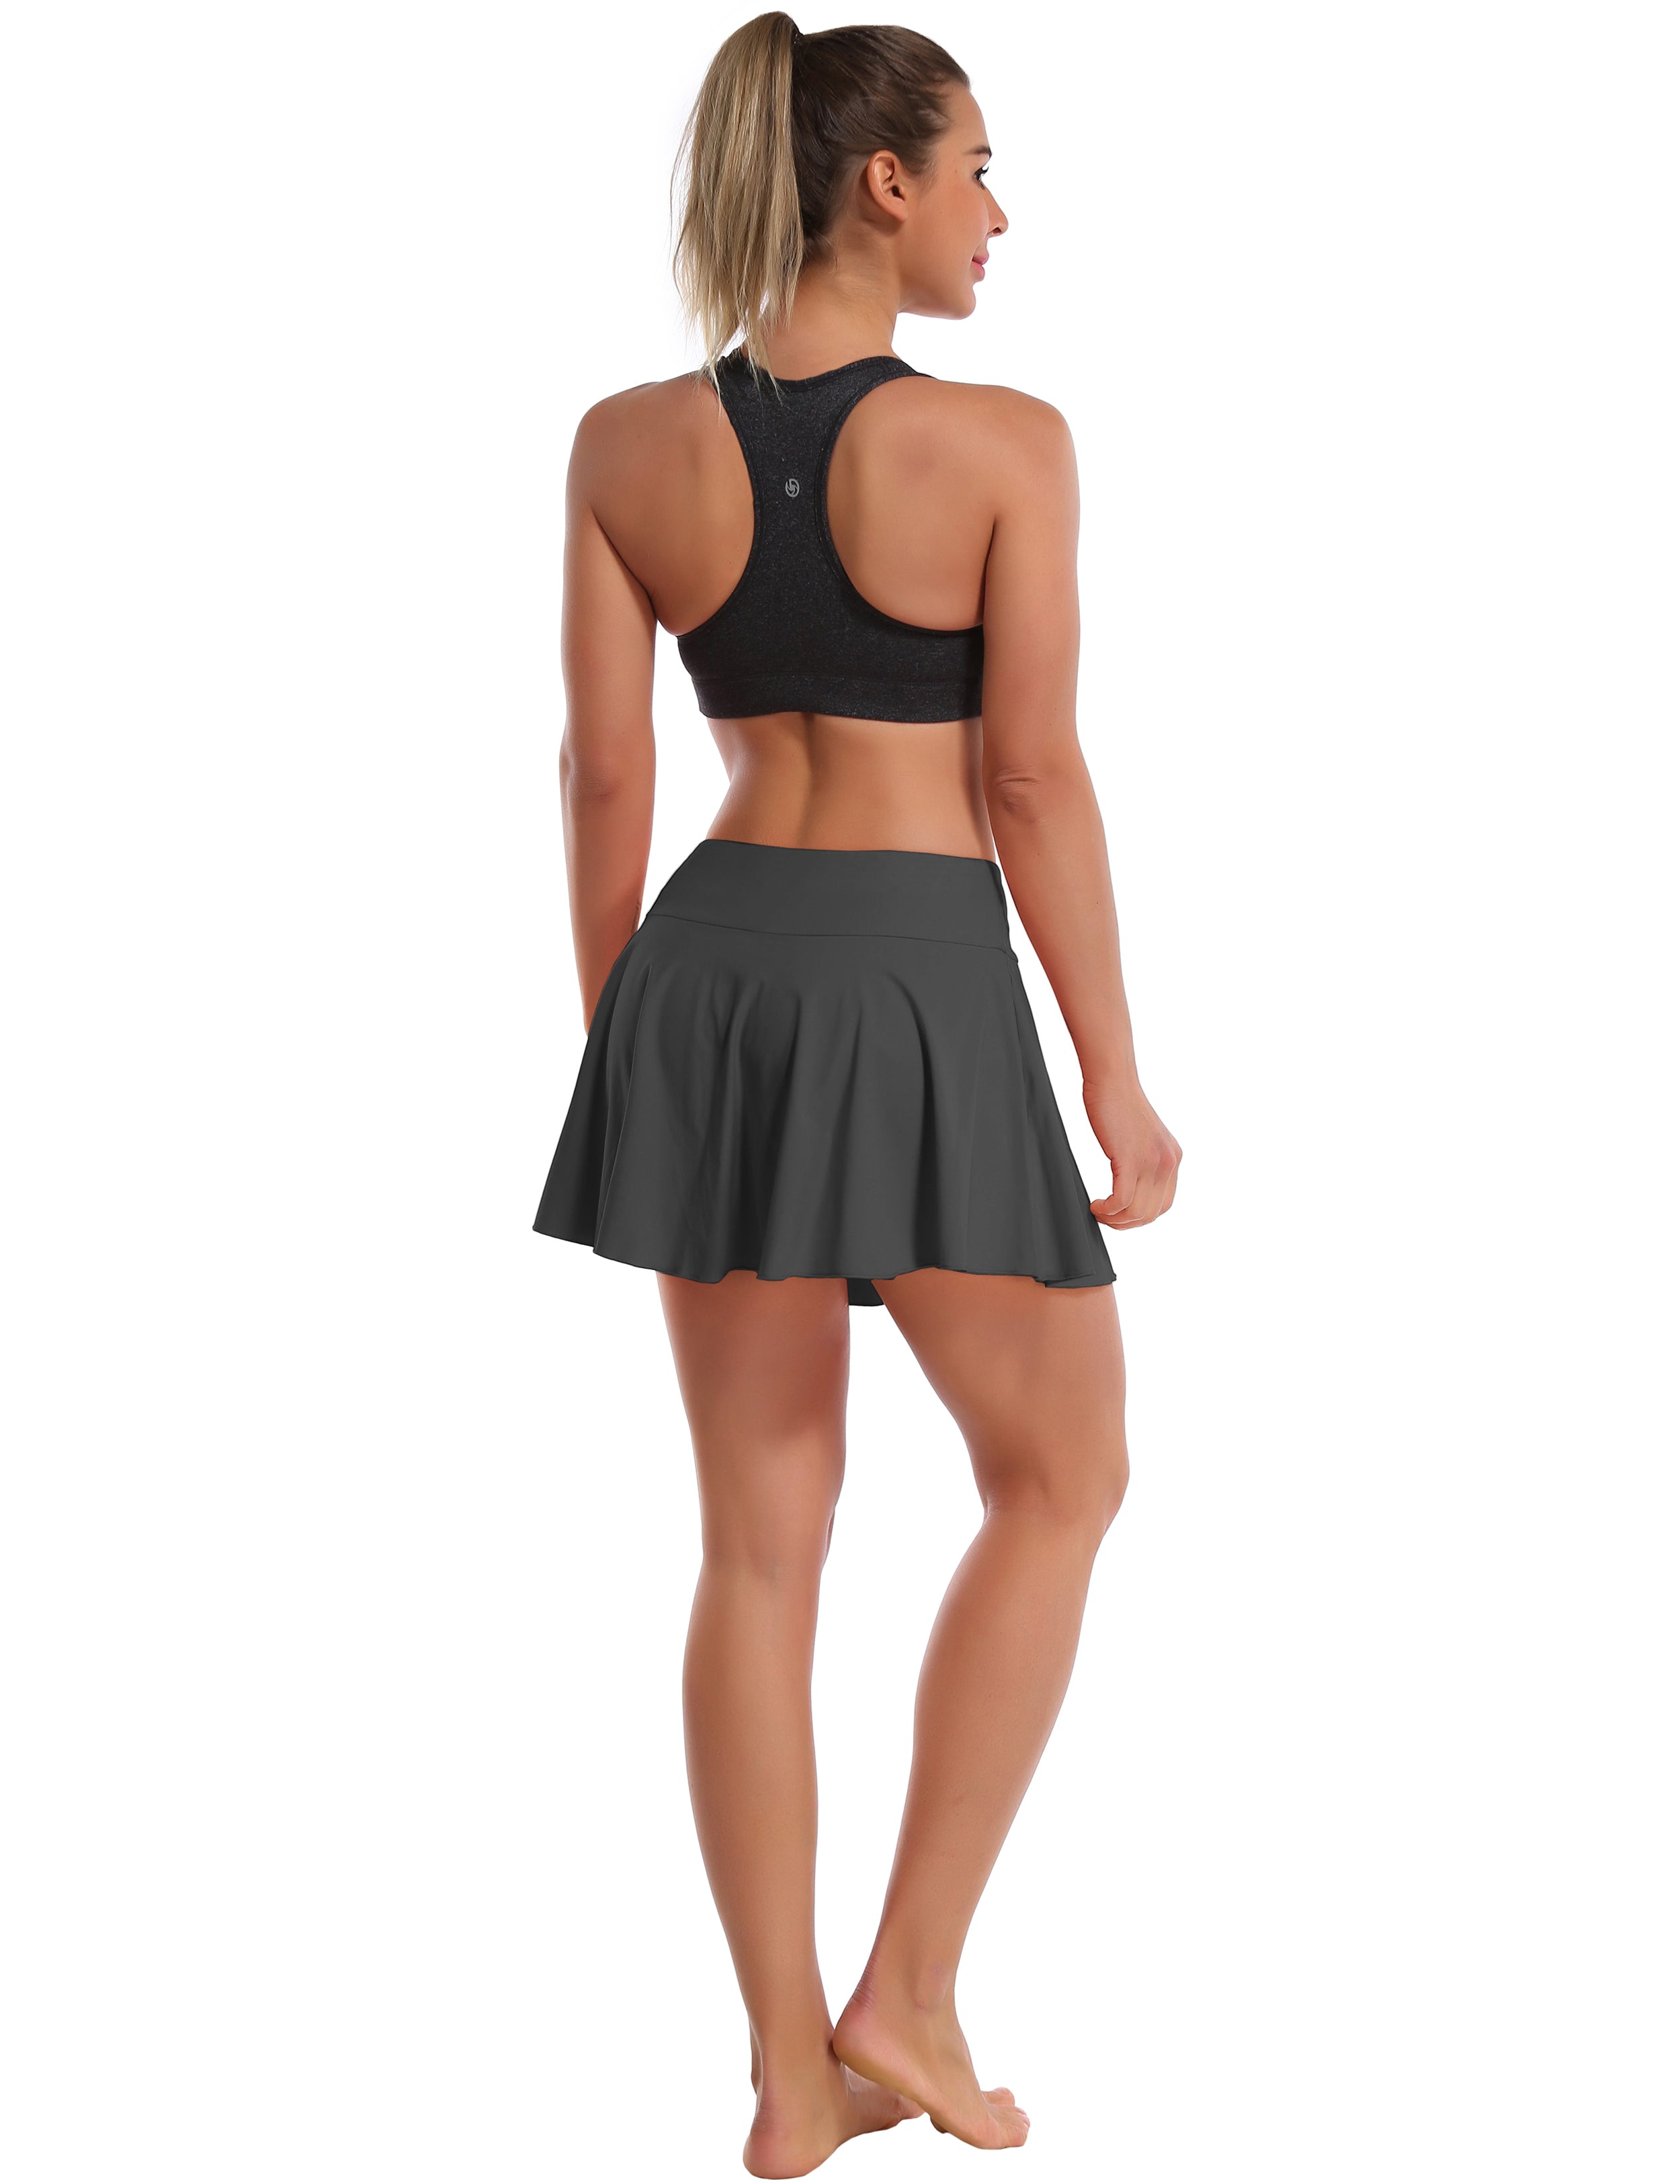 Athletic Tennis Golf Pleated Skort Awith Pocket Shorts shadowcharcoal 80%Nylon/20%Spandex UPF 50+ sun protection Elastic closure Lightweight, Wrinkle Moisture wicking Quick drying Secure & comfortable two layer Hidden pocket